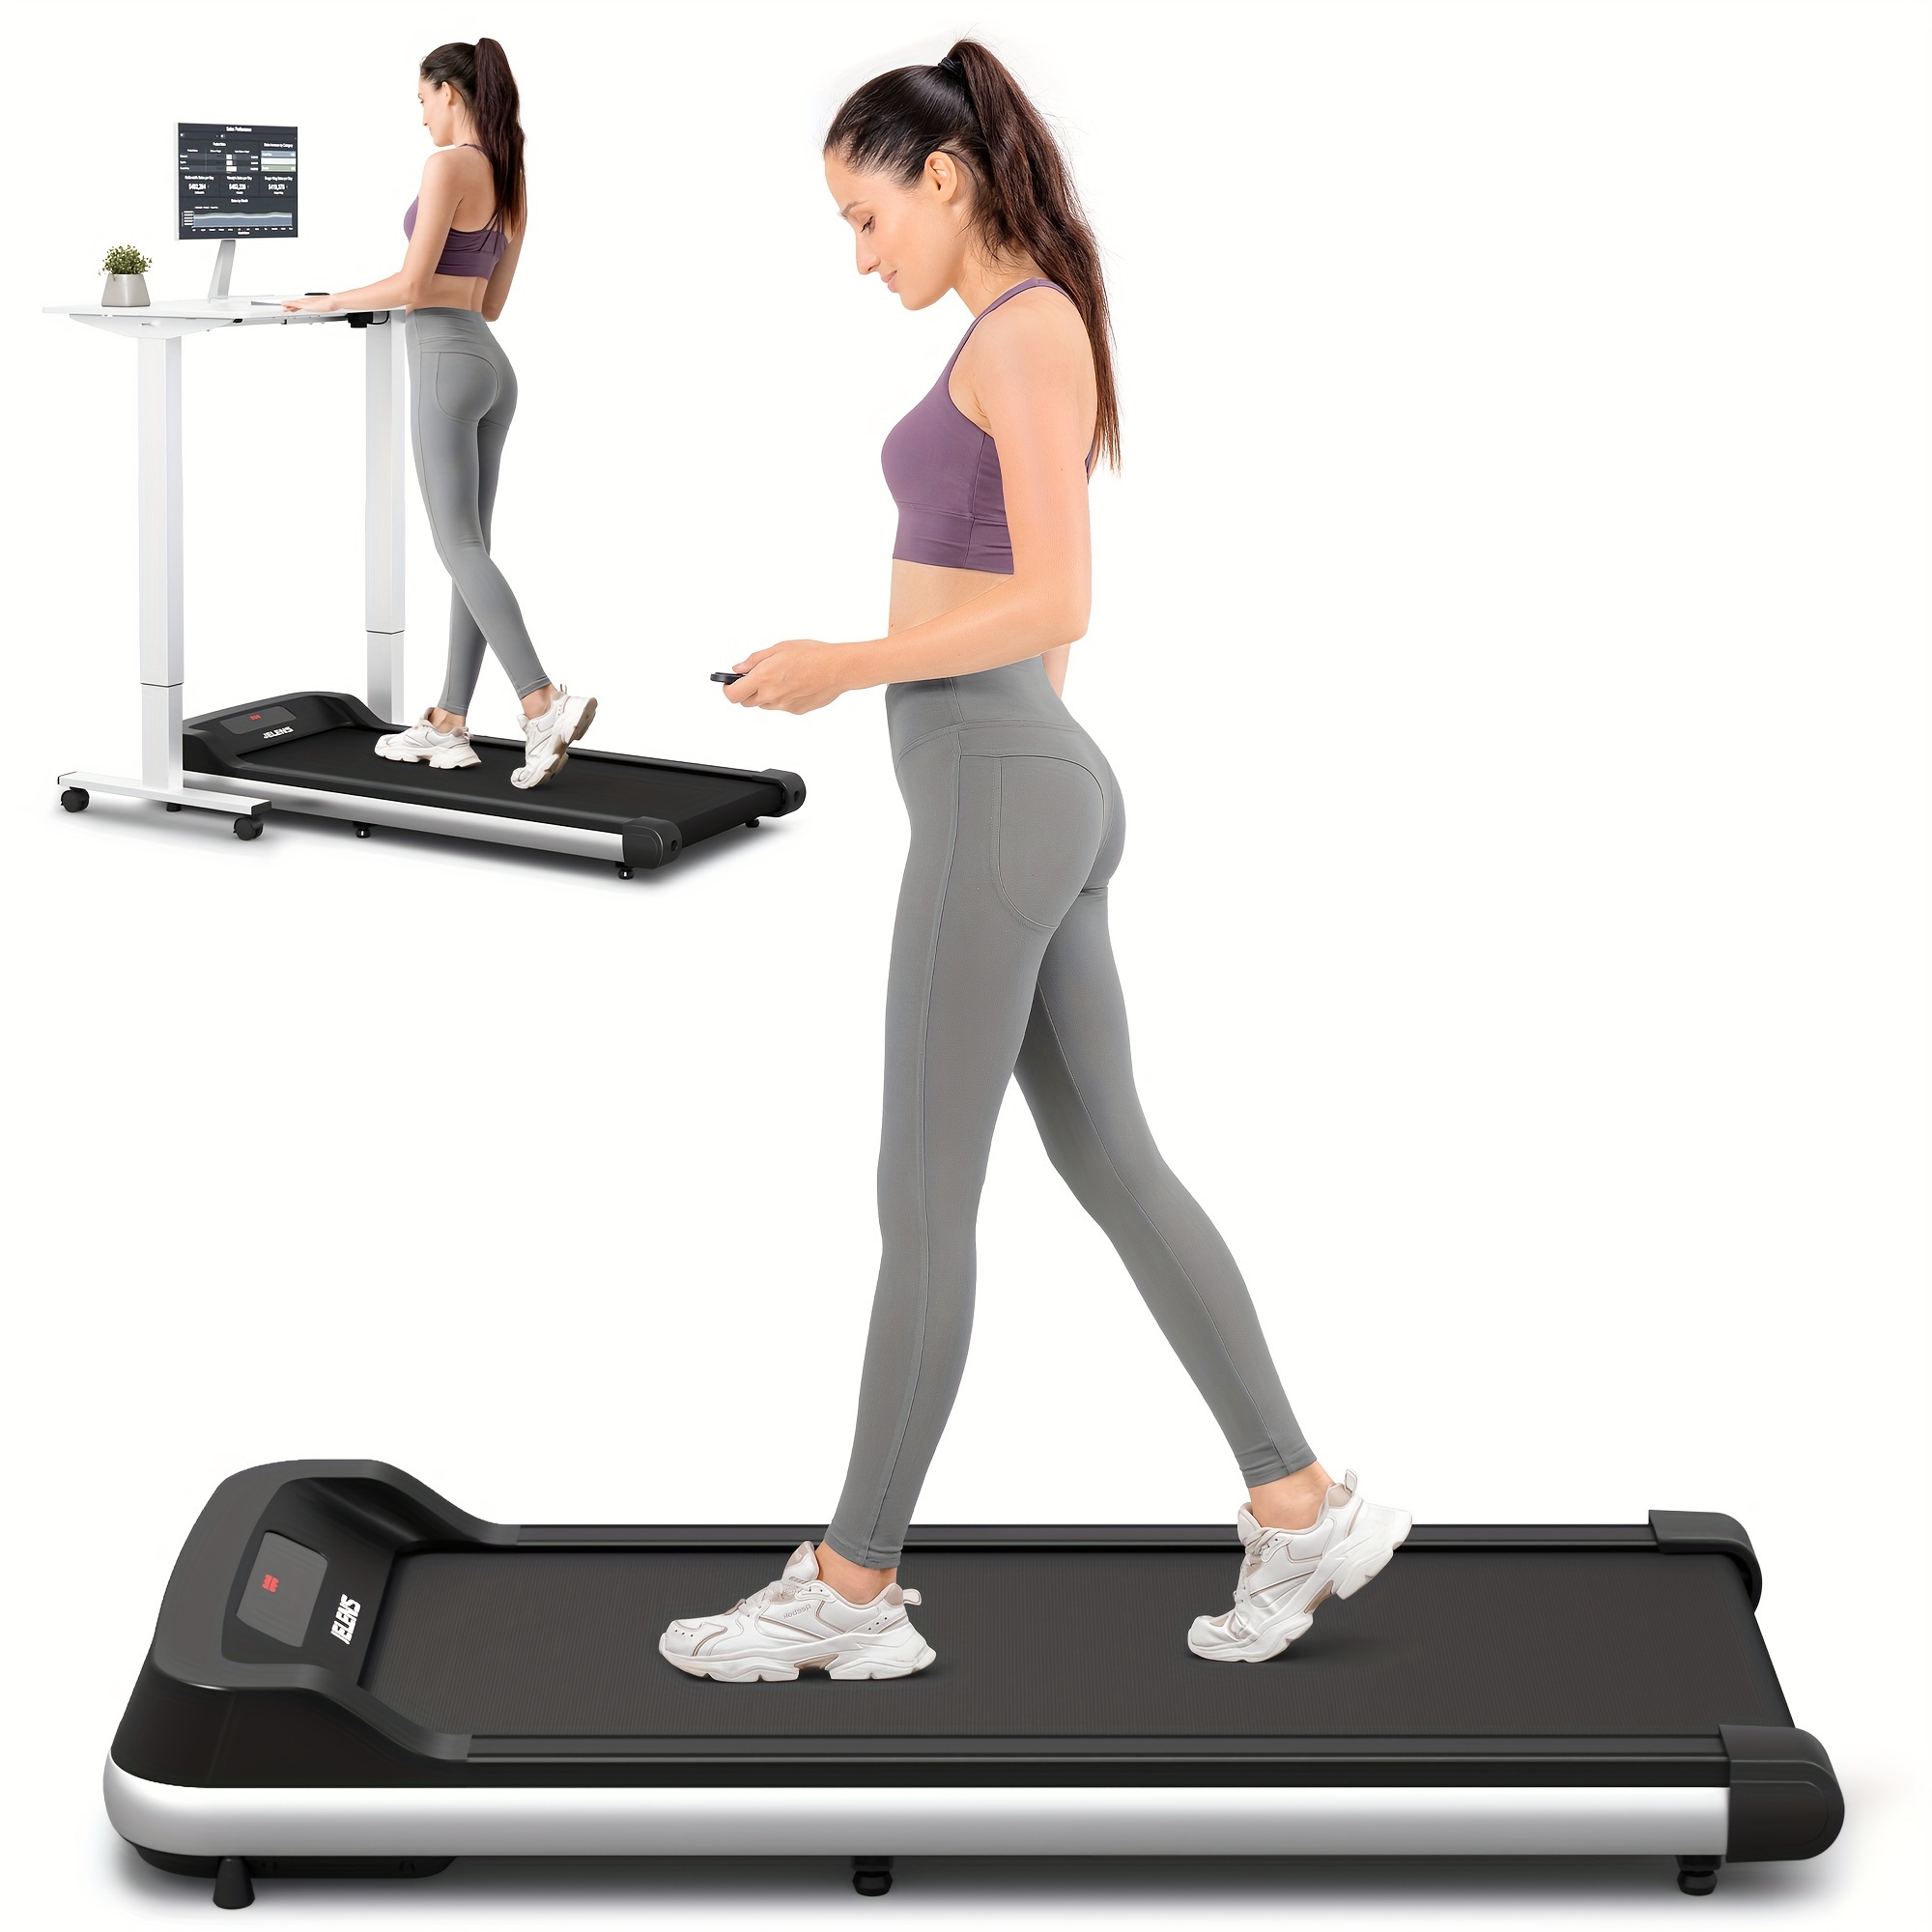 

Walking Pad, 2 In 1 Under Desk Treadmill With Remote Control, Portable Treadmill With Led Display, Jogging Machine For Home And Office